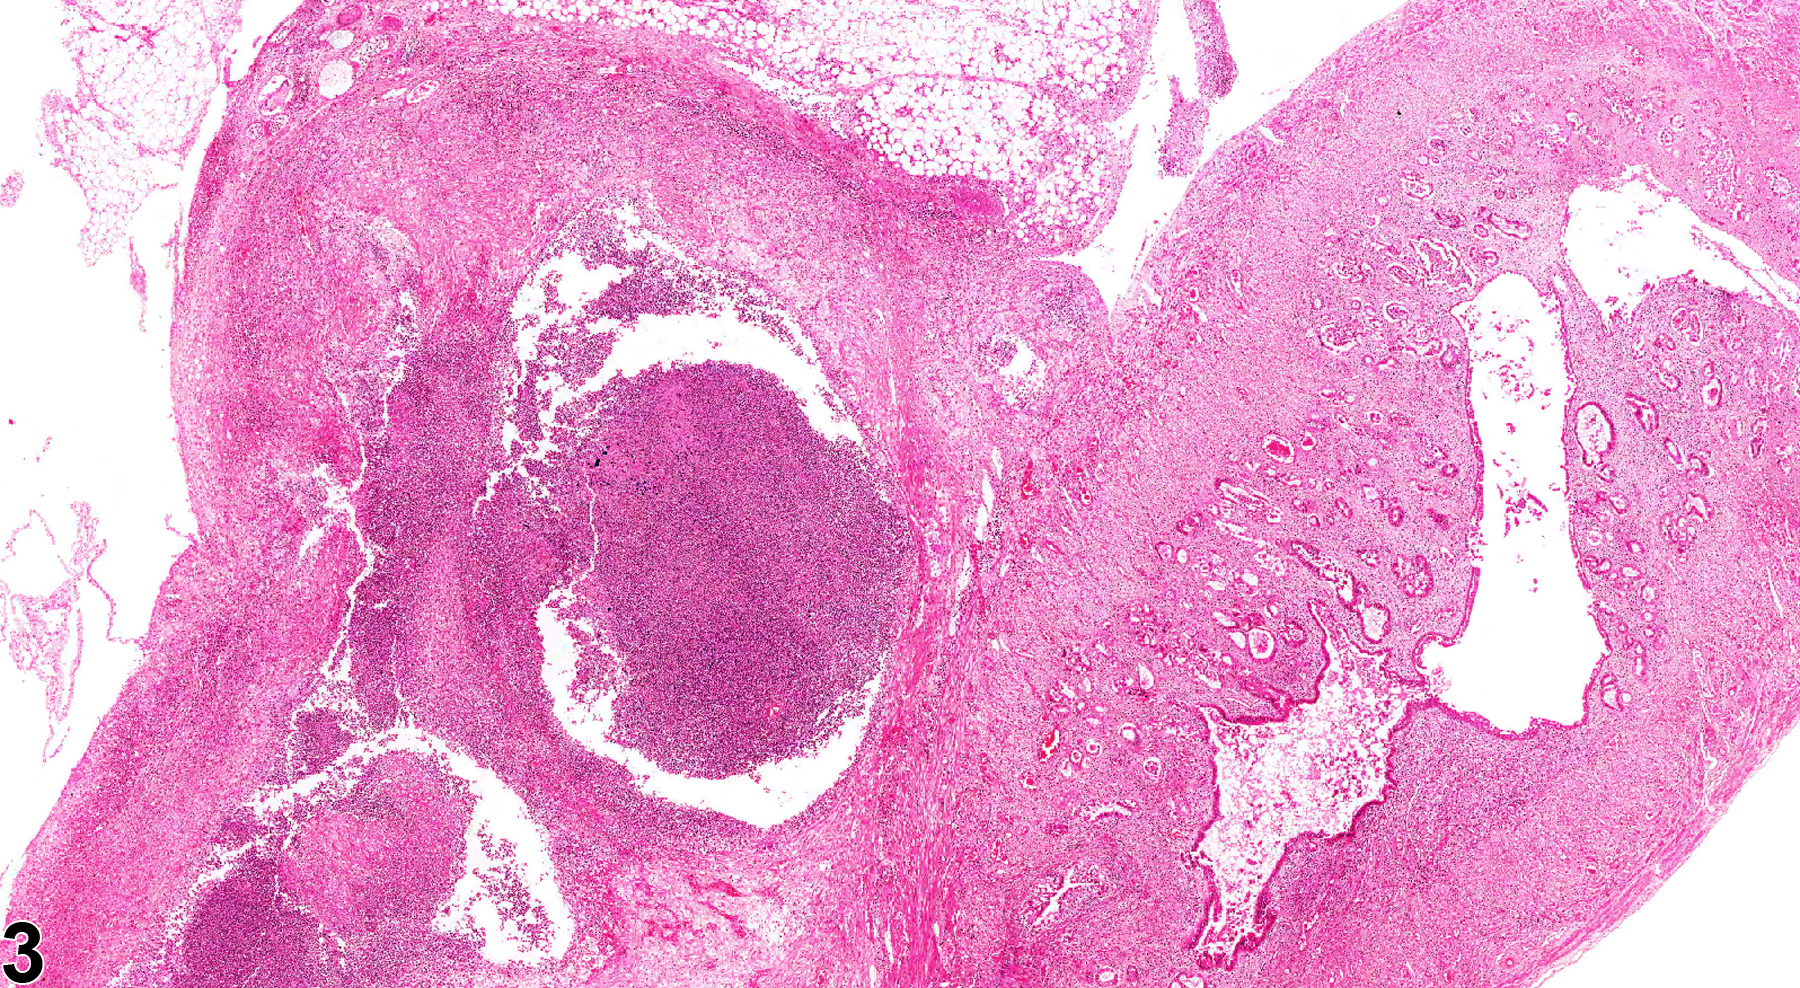 Image of inflammation, suppurative in the uterus from a female B6C3F1 mouse in a chronic study